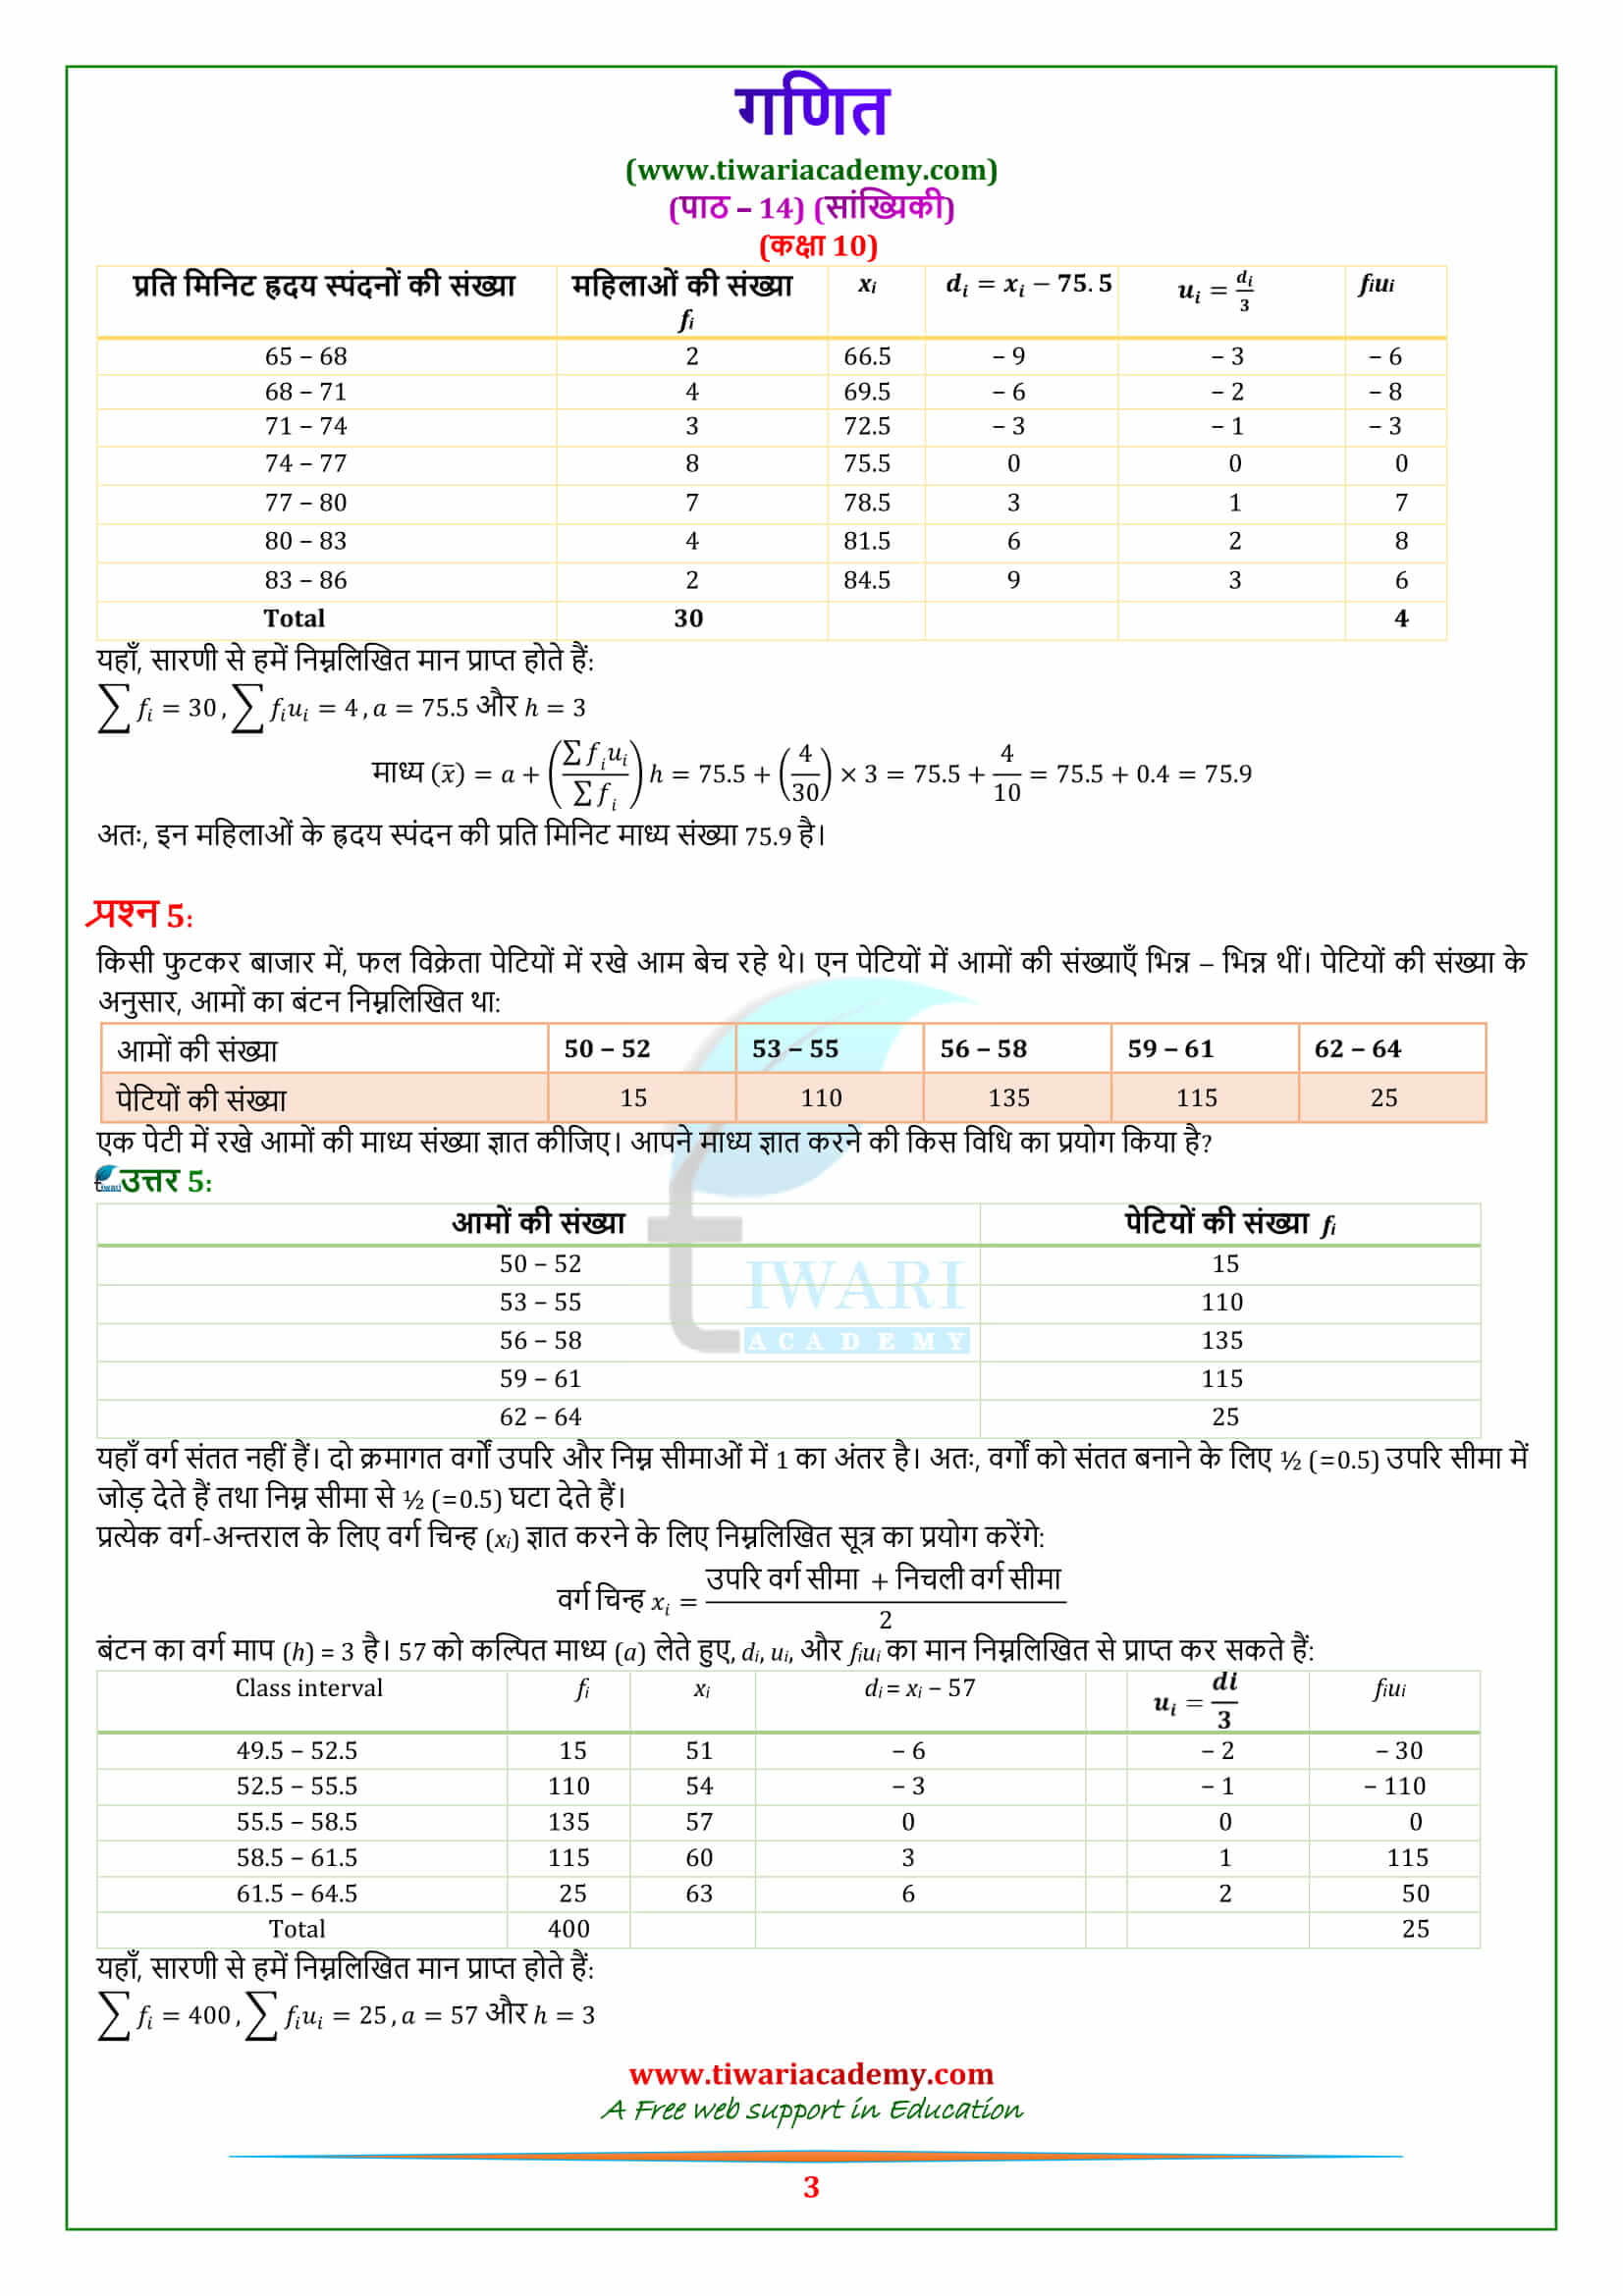 NCERT Solutions for class 10 Maths Chapter 14 Exercise 14.1 in pdf form free